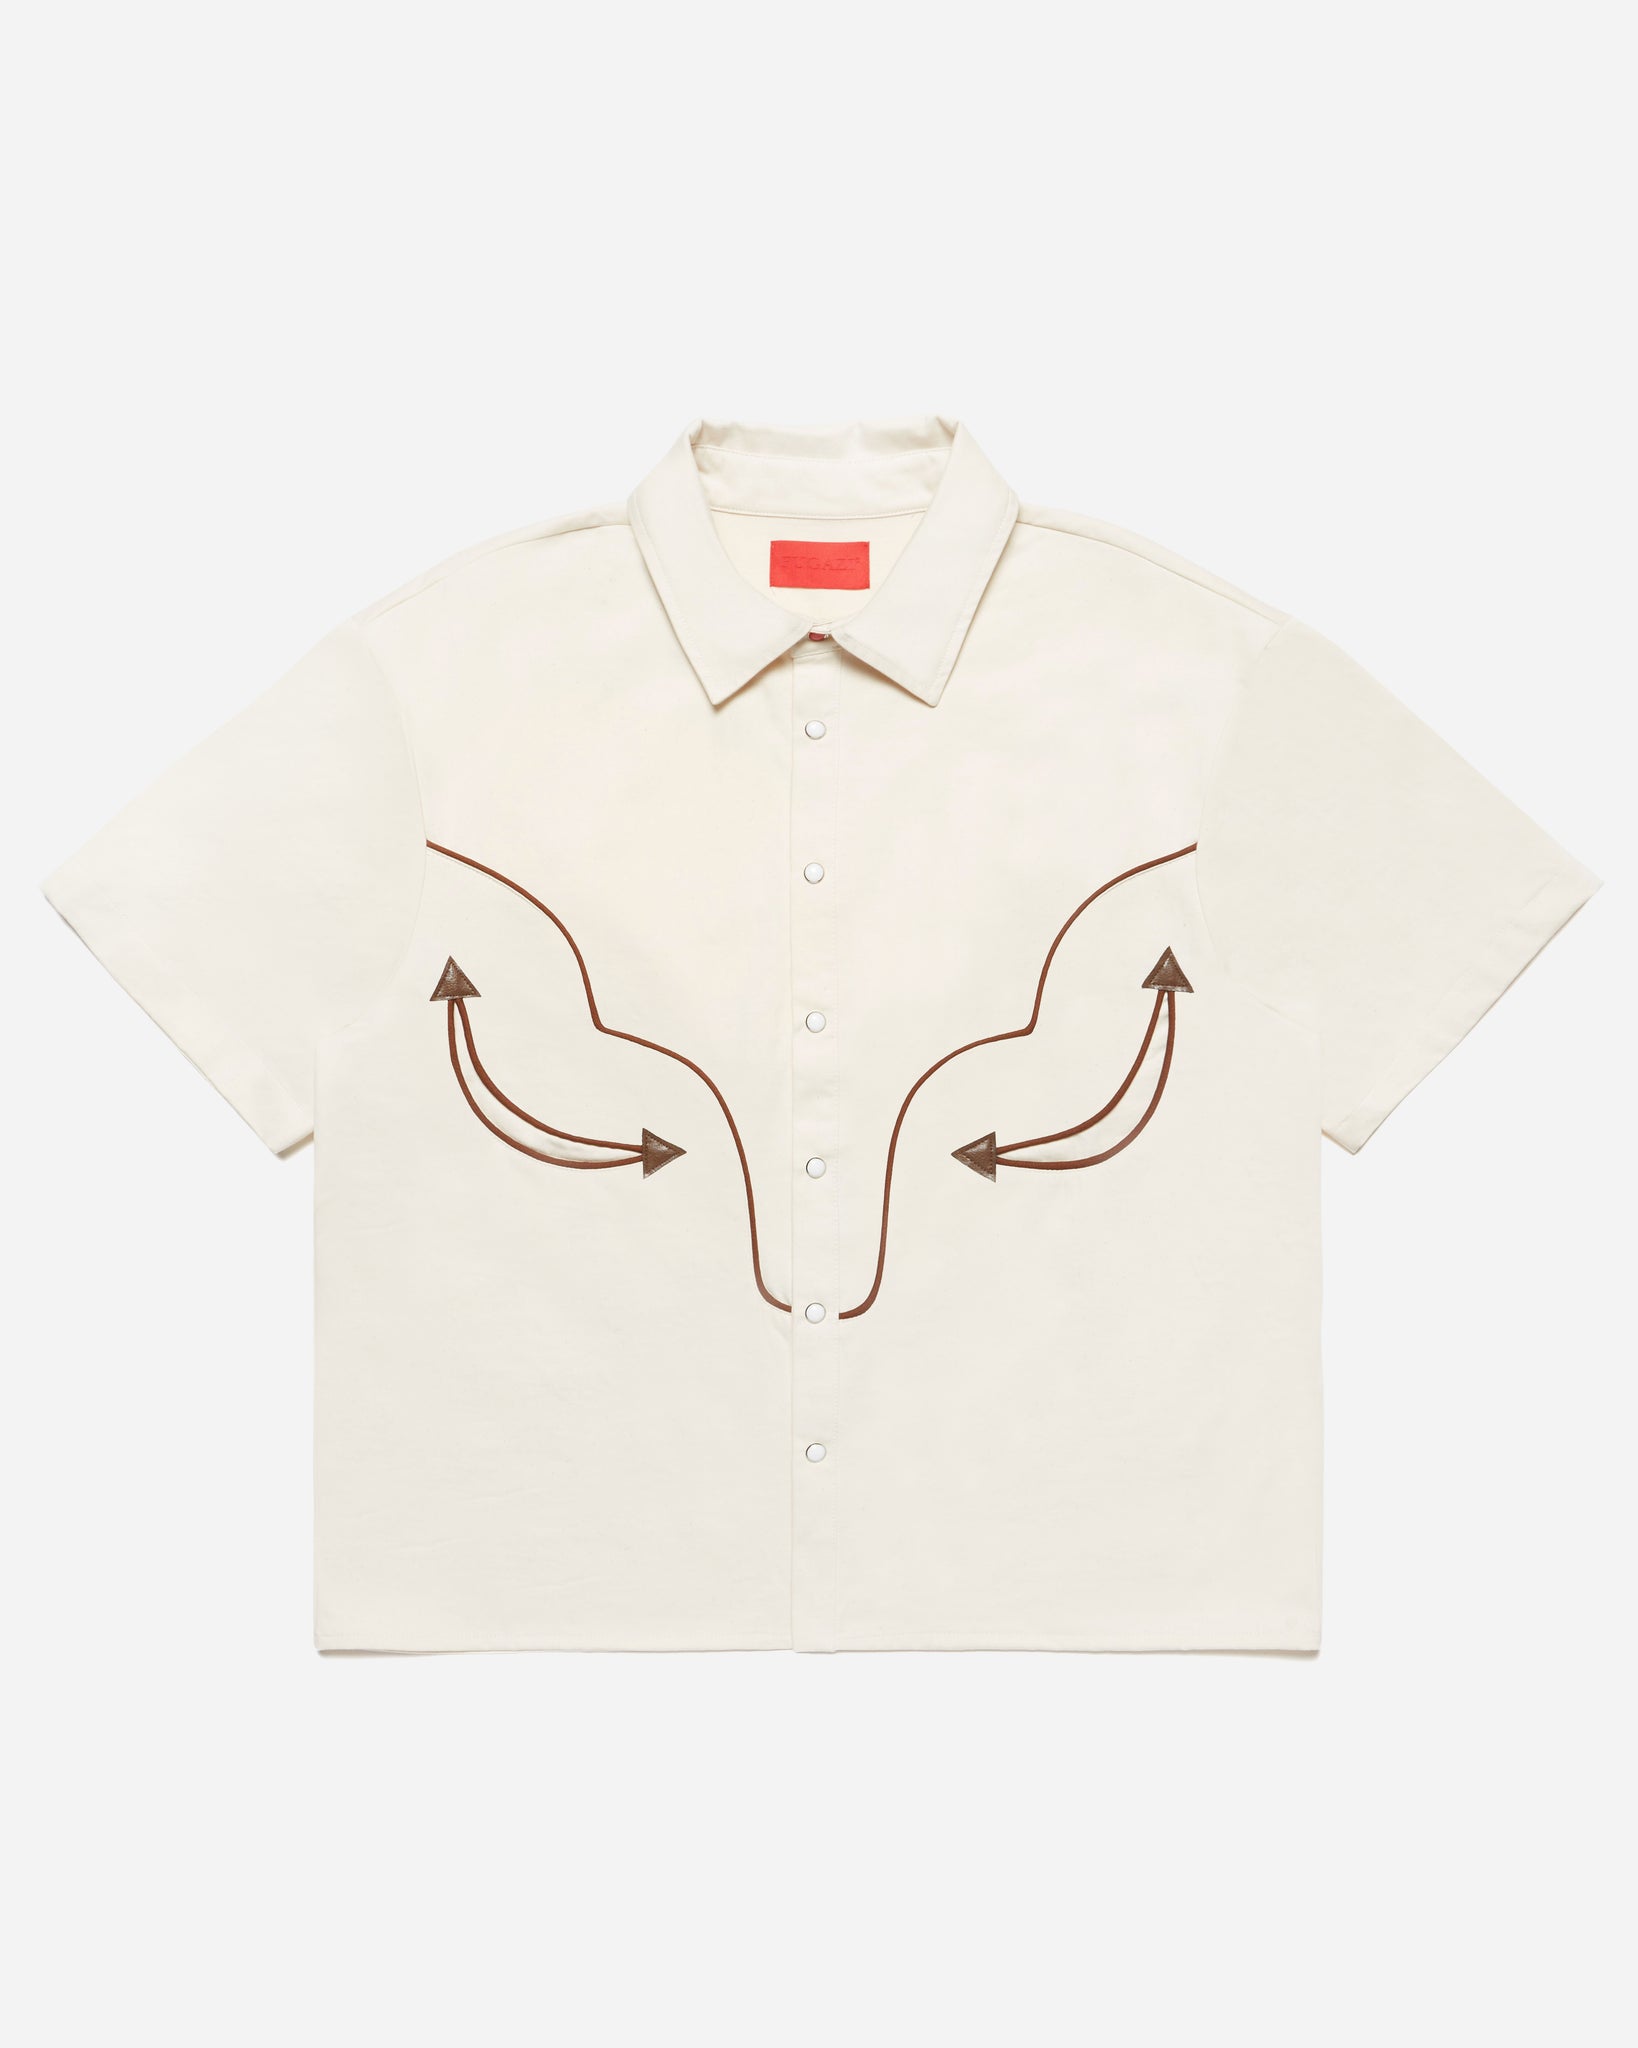 Two Tooth Bowling Shirt Cream